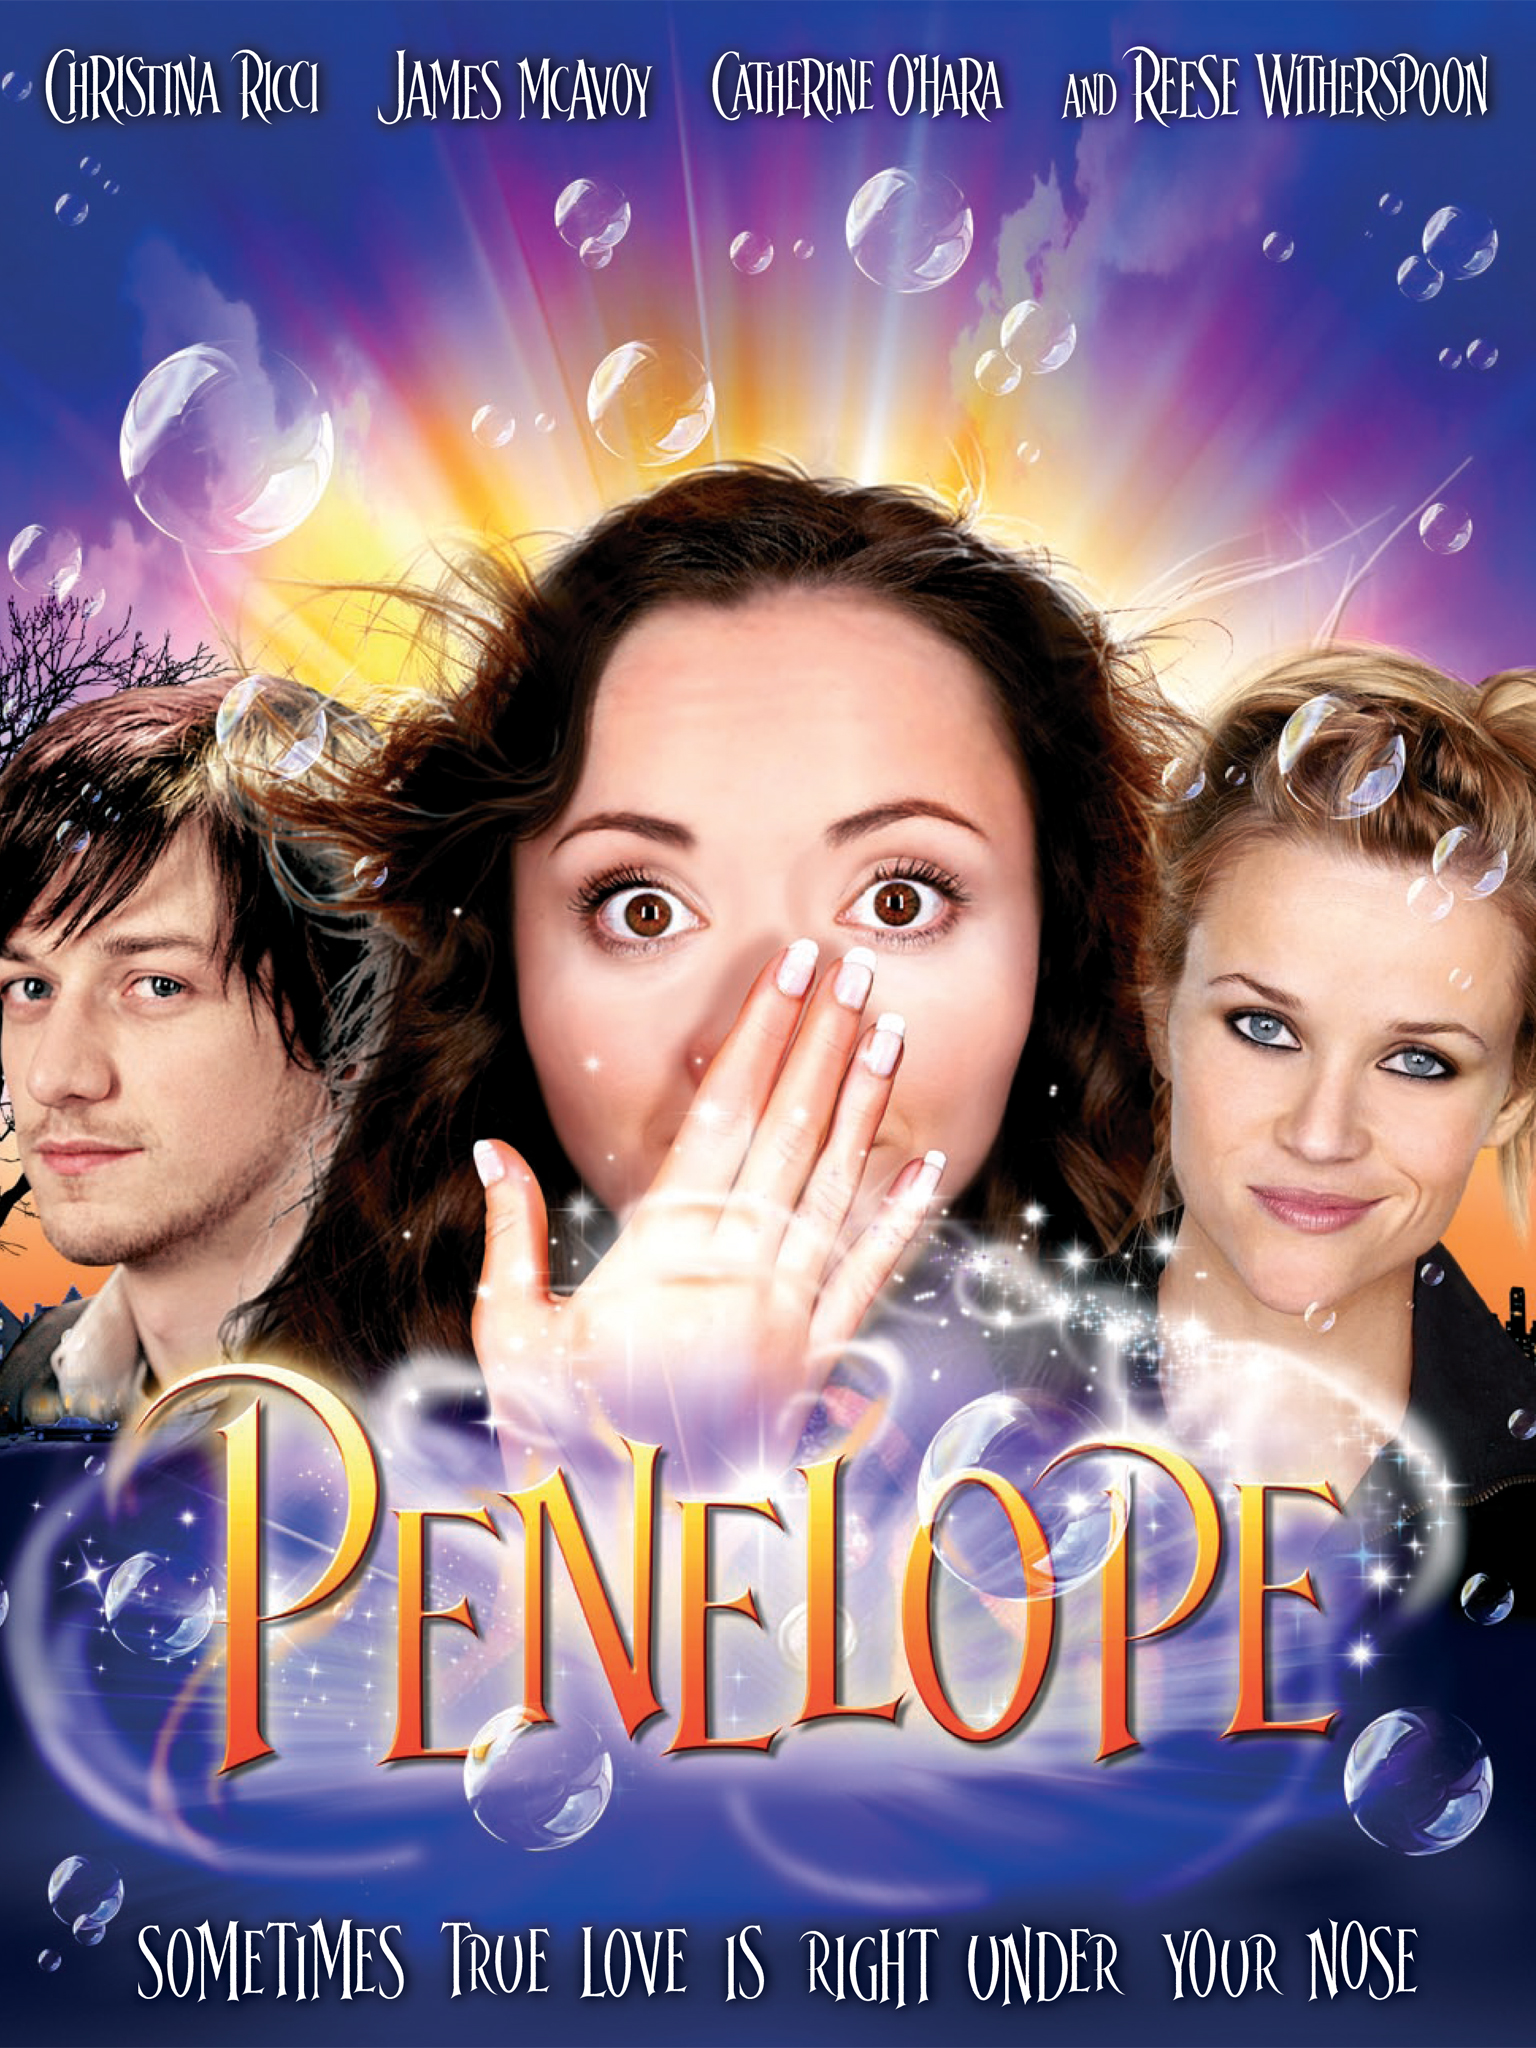 family movie review penelope